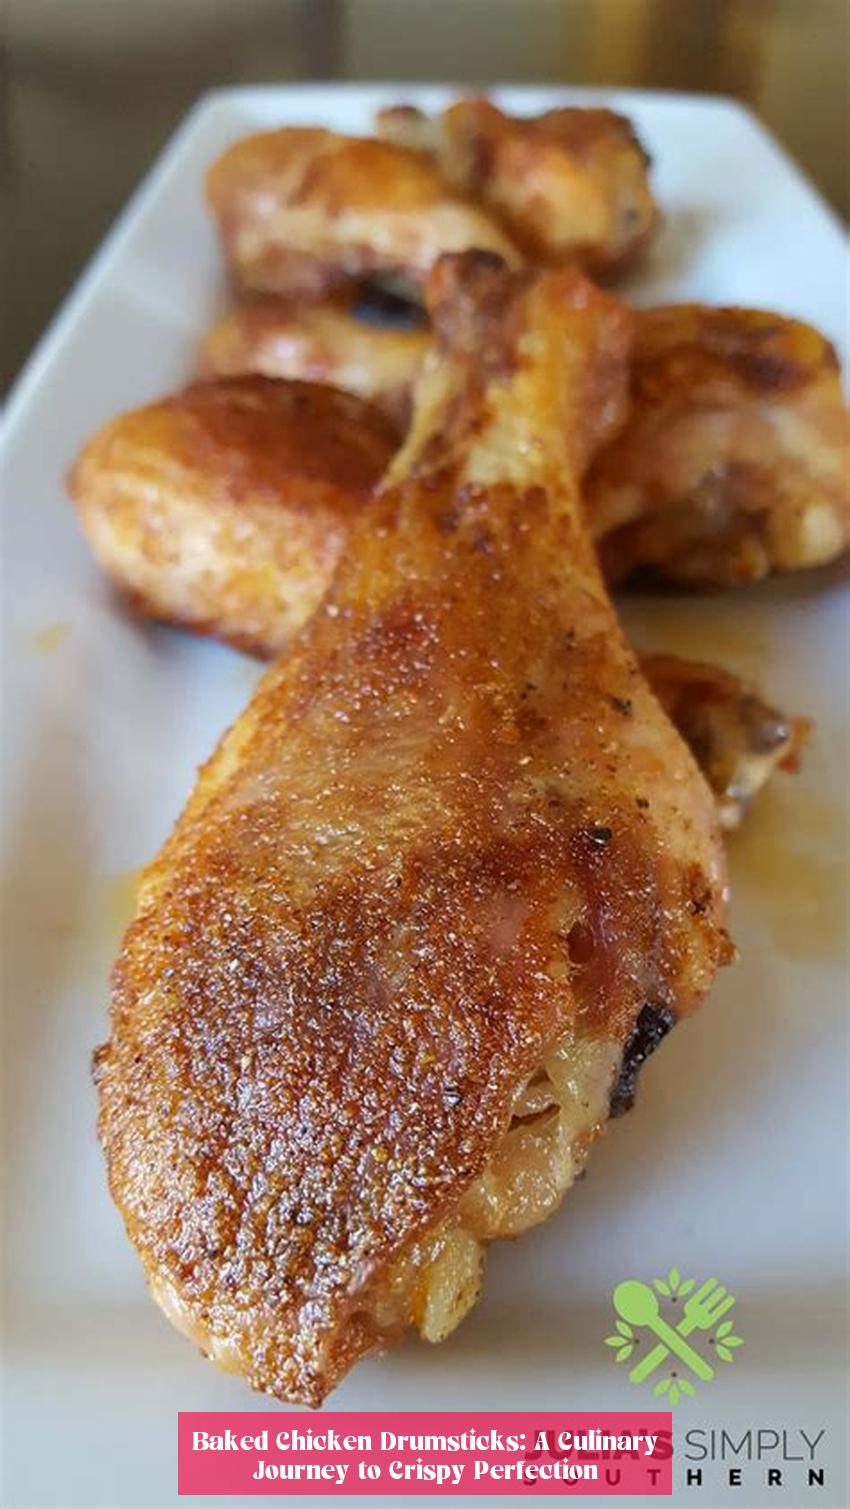 Baked Chicken Drumsticks: A Culinary Journey to Crispy Perfection